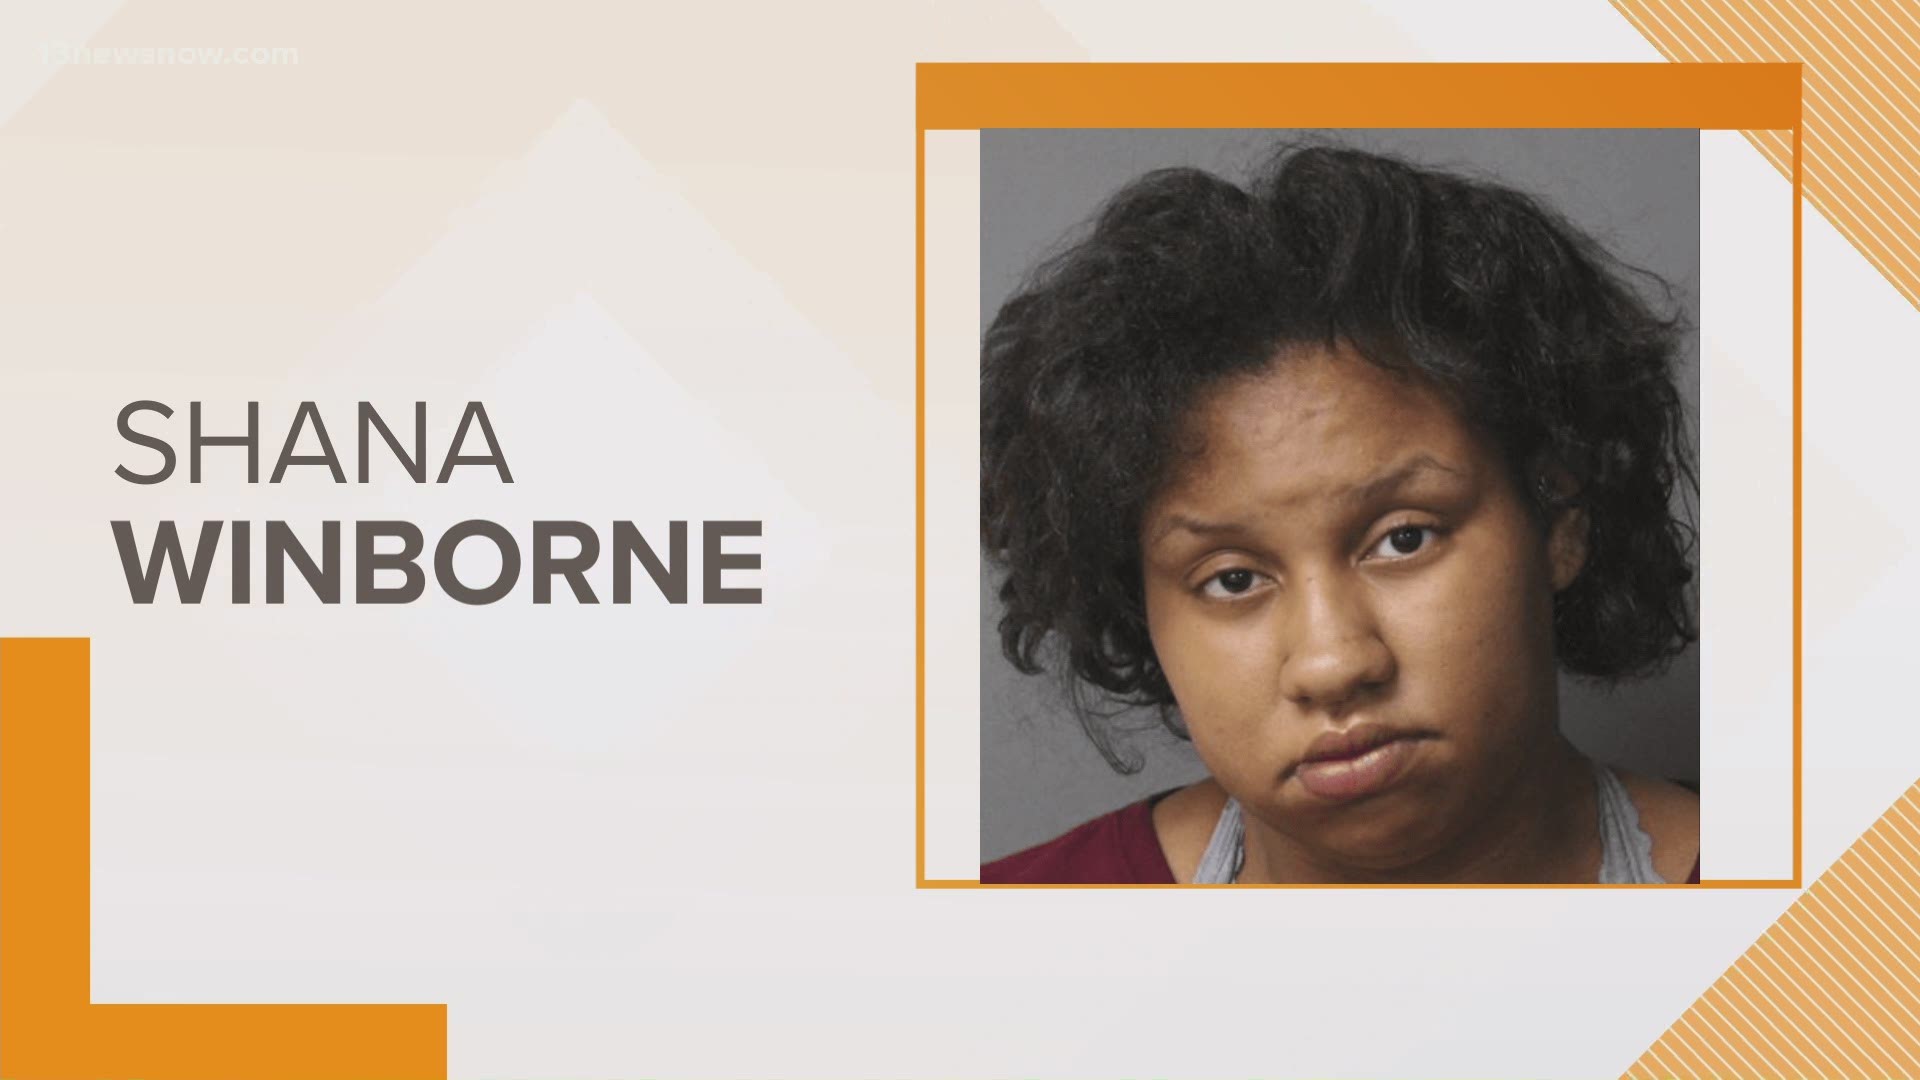 A woman was charged with second-degree murder for allegedly stabbing and killing a man in Norfolk.